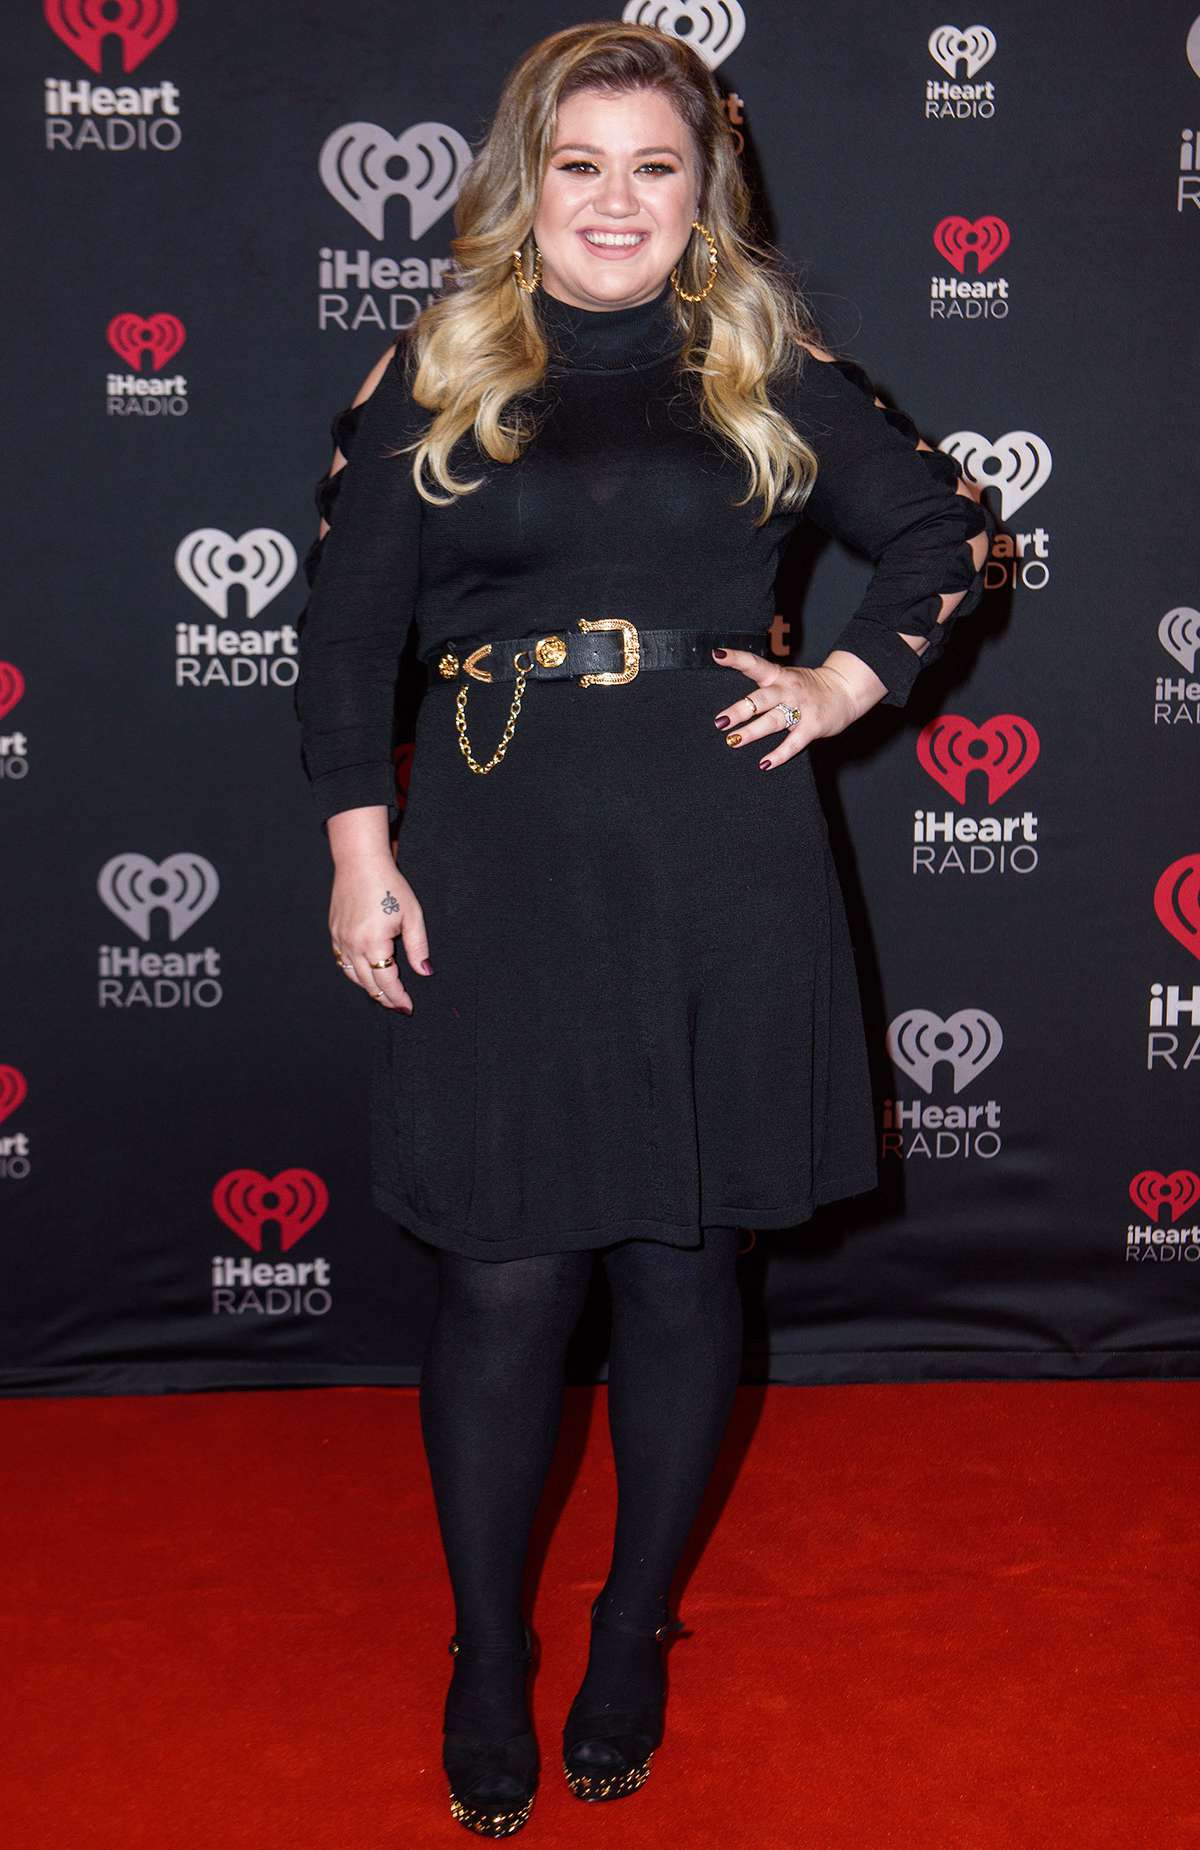 Vocalist Kelly Clarkson attends the 2017 iHeartRadio Canada Jingle Ball at the Air Canada Centre on December 9, 2017 in Toronto, Canada.